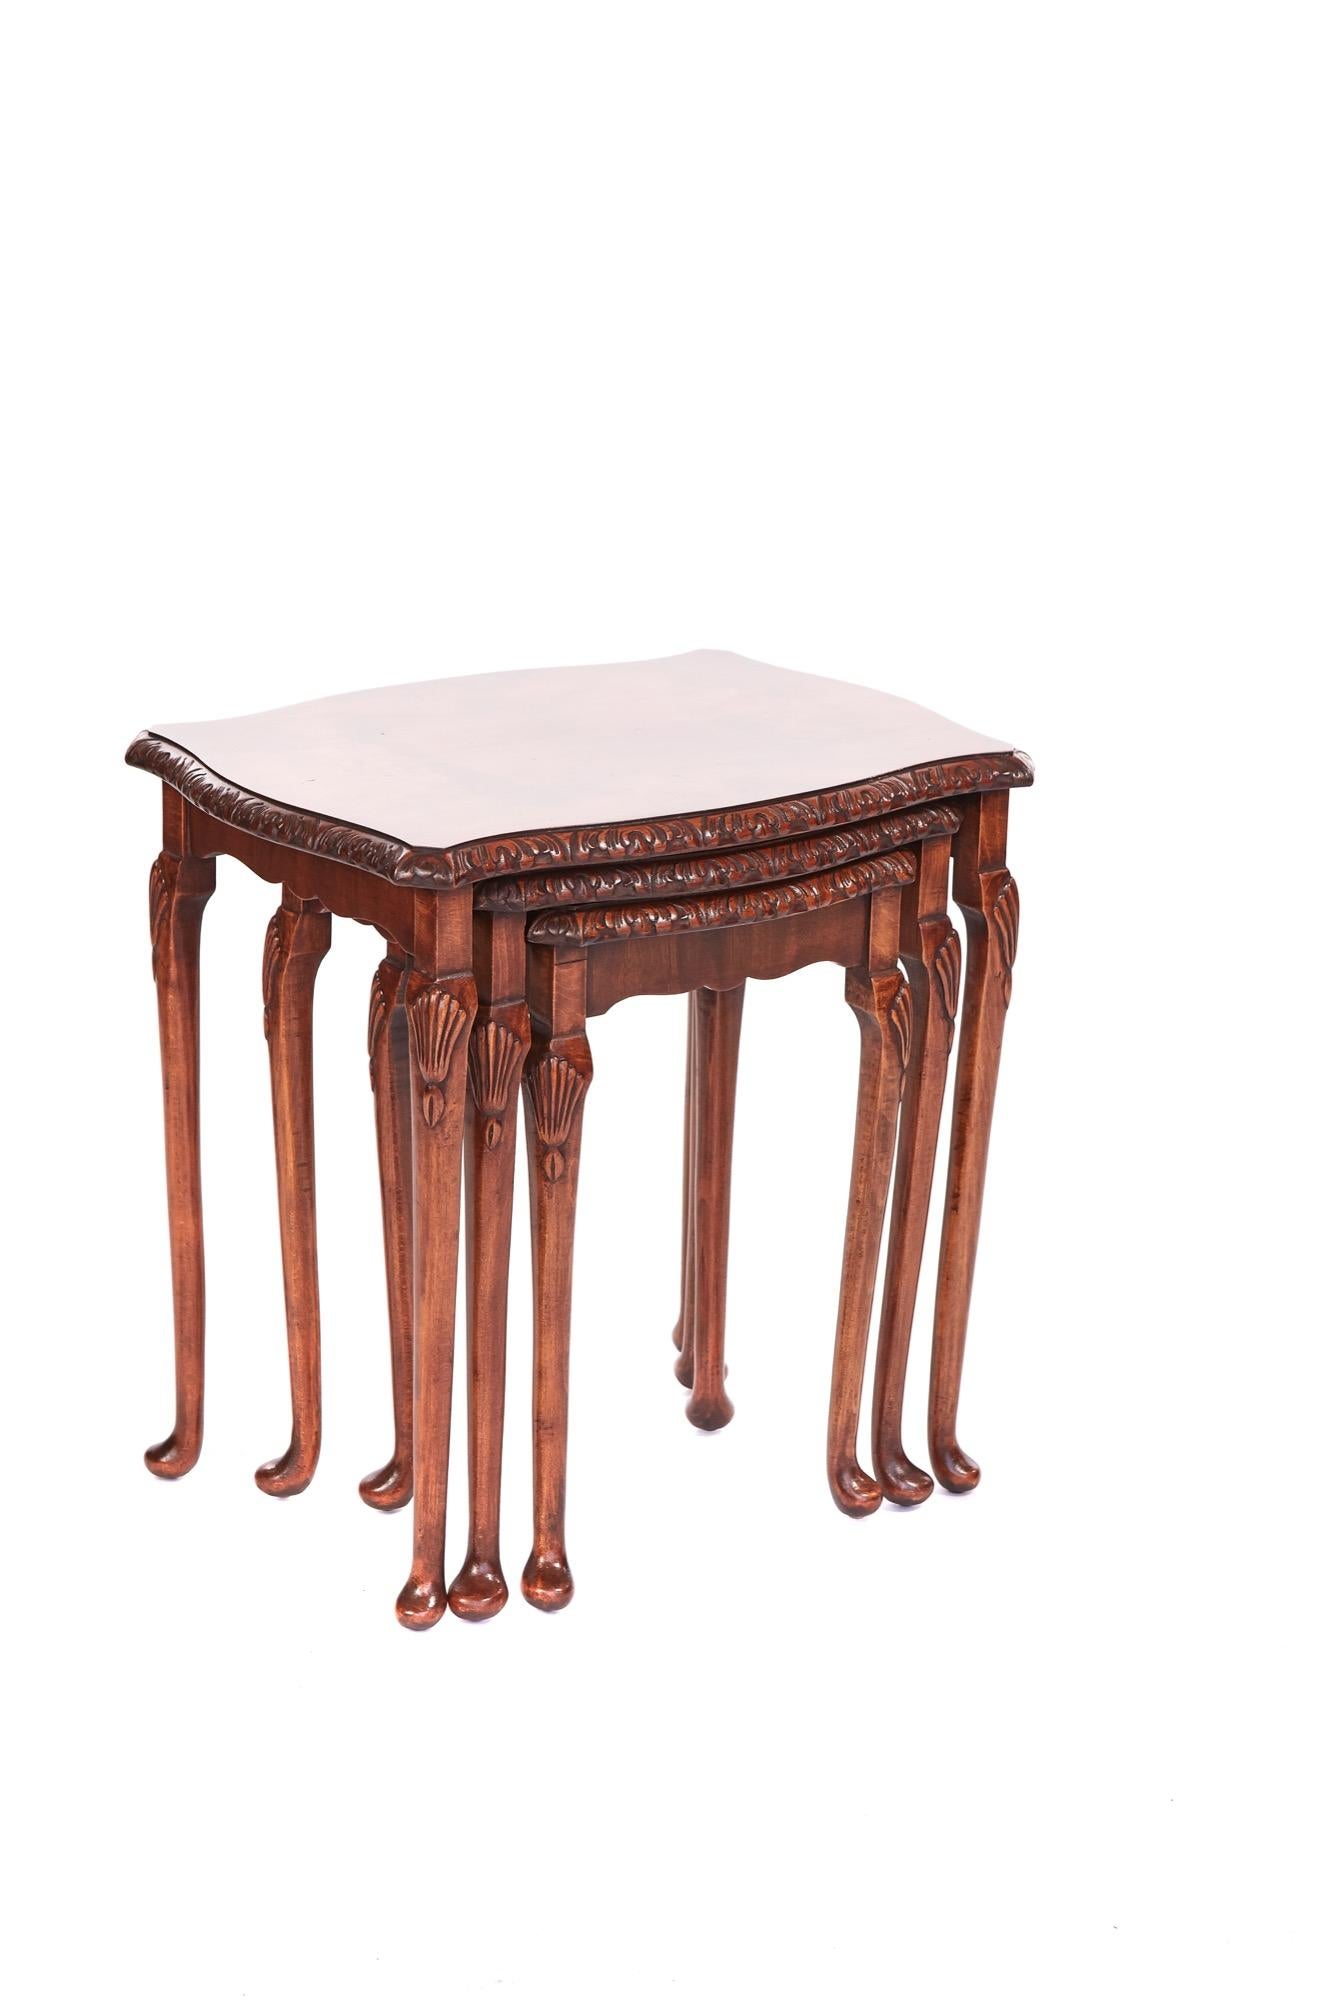 Antique Walnut Nest Of Three Tables having lovely carvings around the edge of the table tops supported by cabriole shaped legs with fantastic shell carvings to the top and standing on pad feet.

H: 55cm W: 56cm D: 42cm.